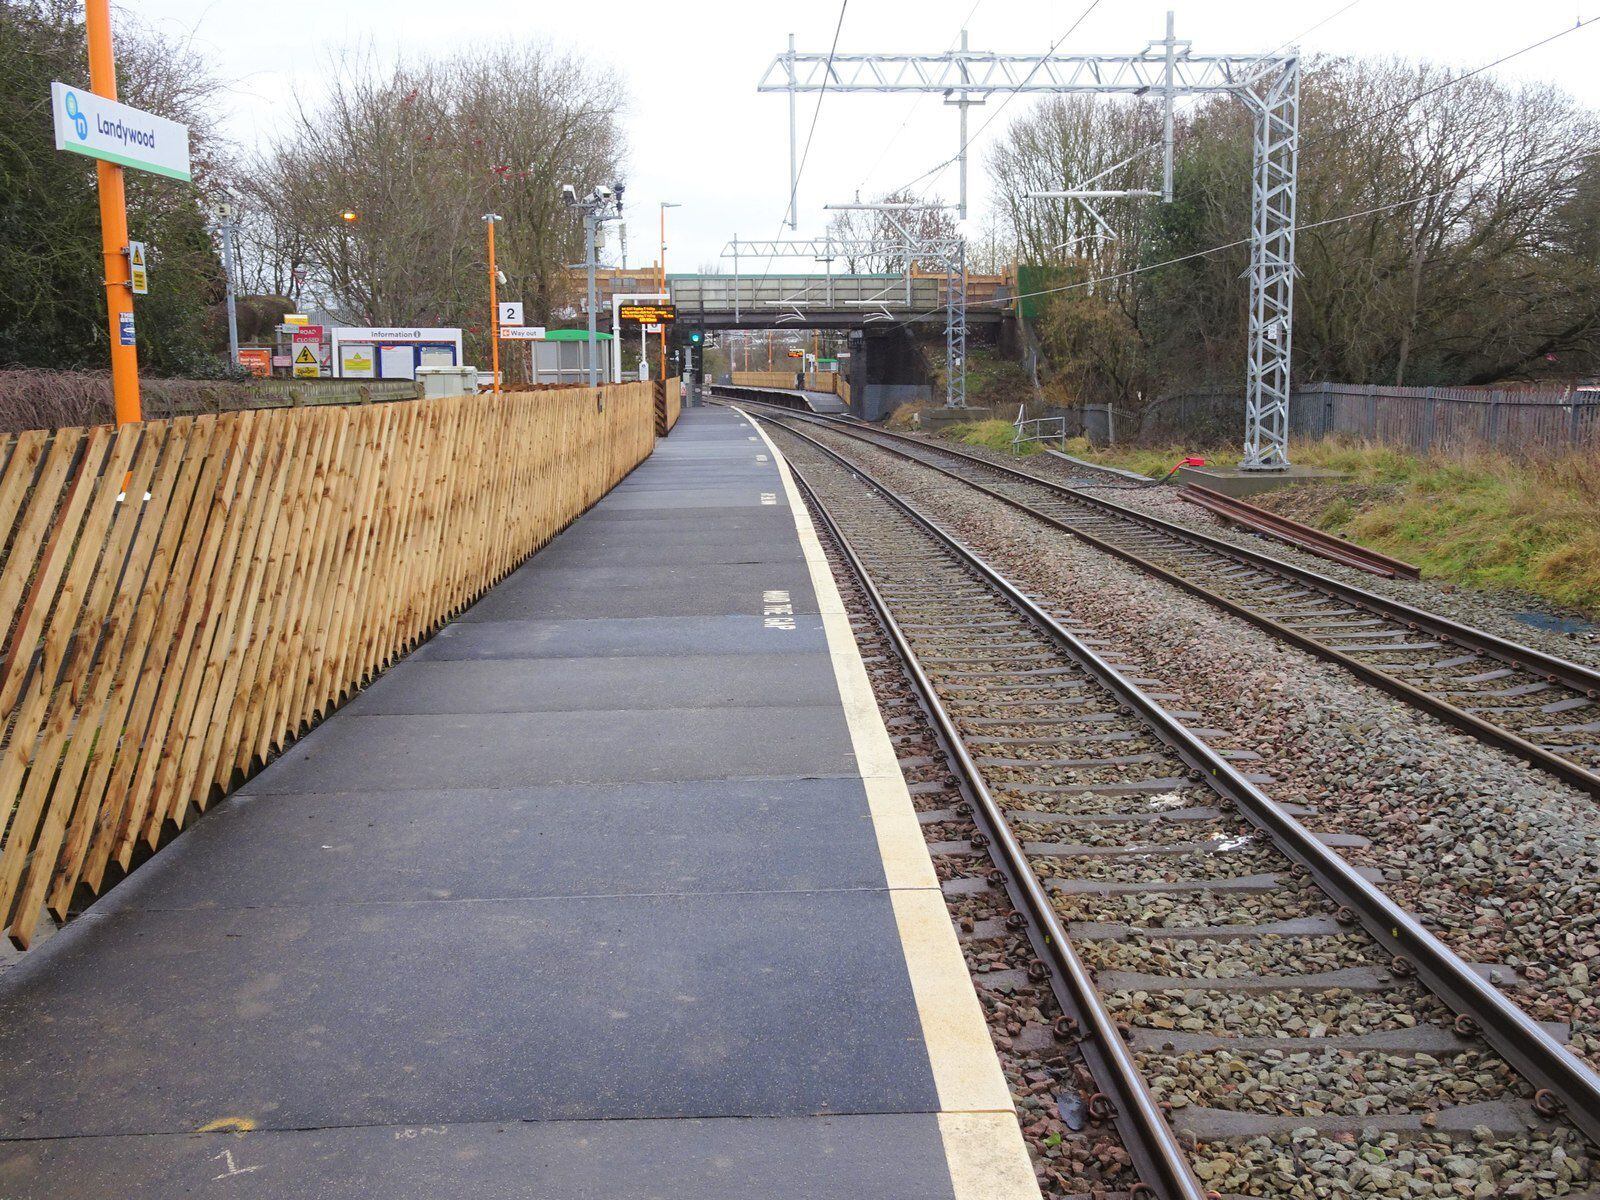 Trespassers on line delay trains in Staffordshire